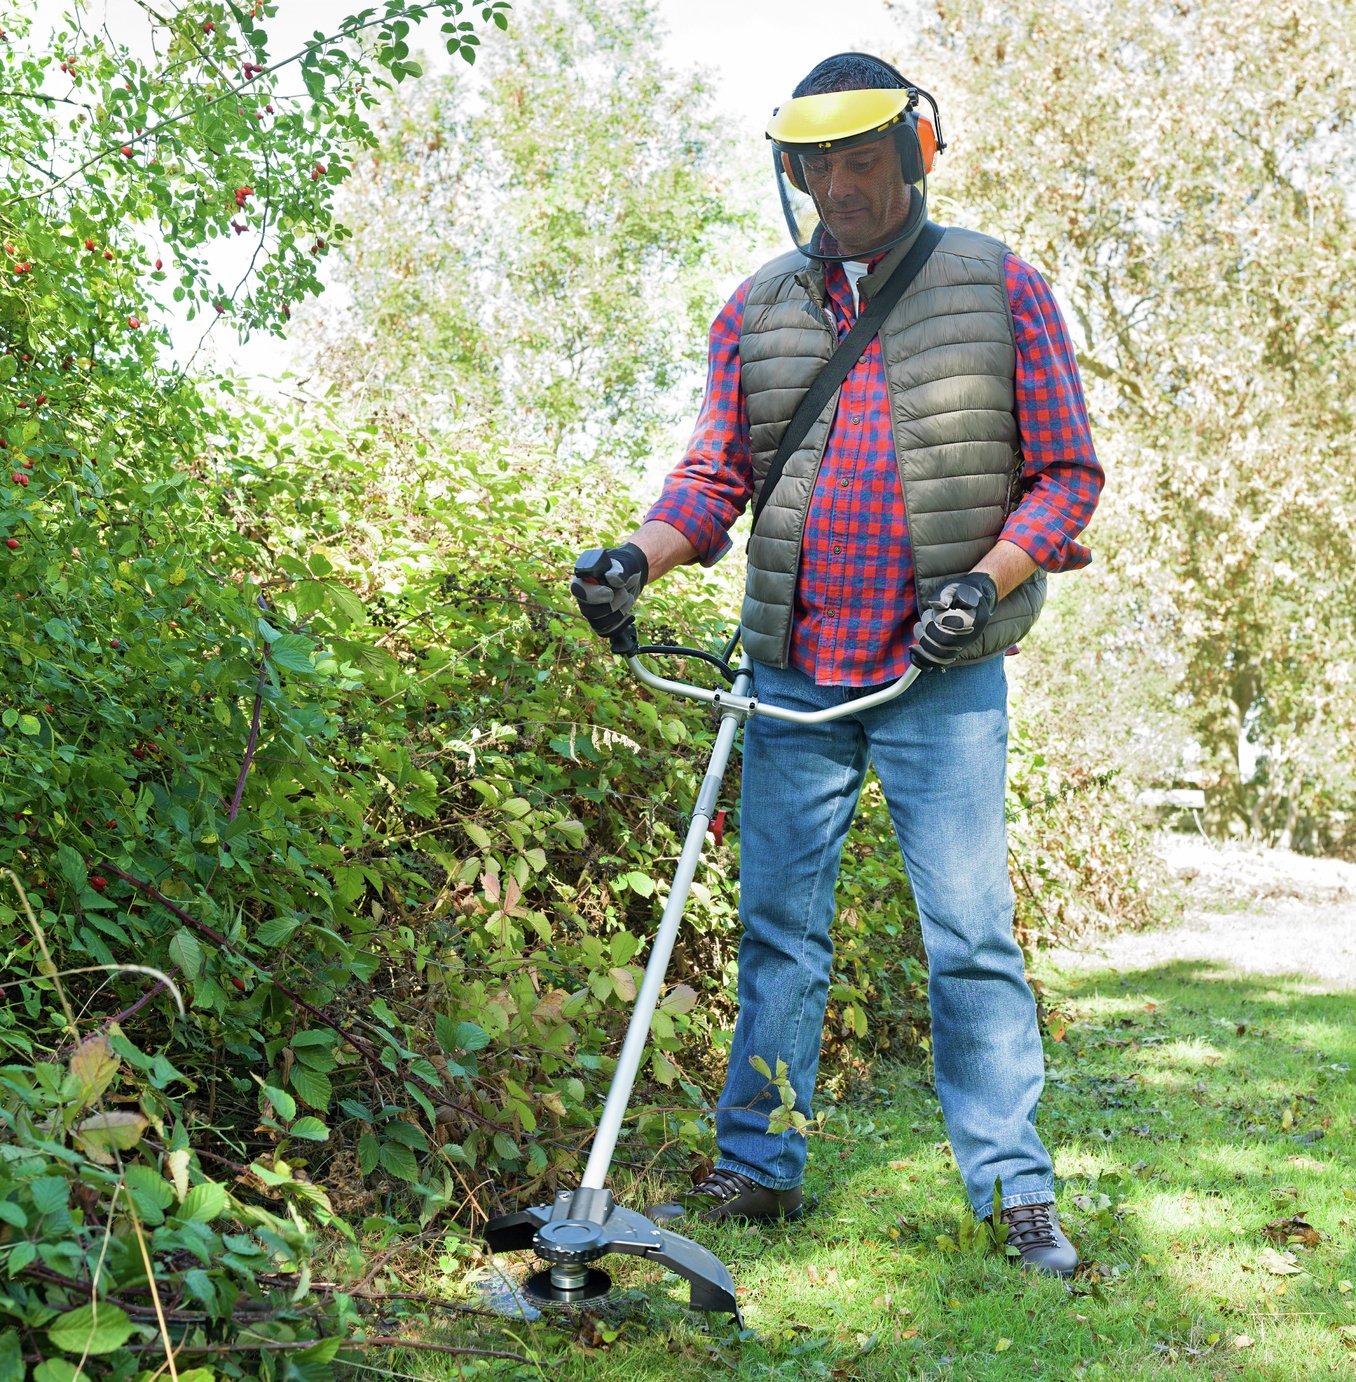 spear and jackson electric grass trimmer